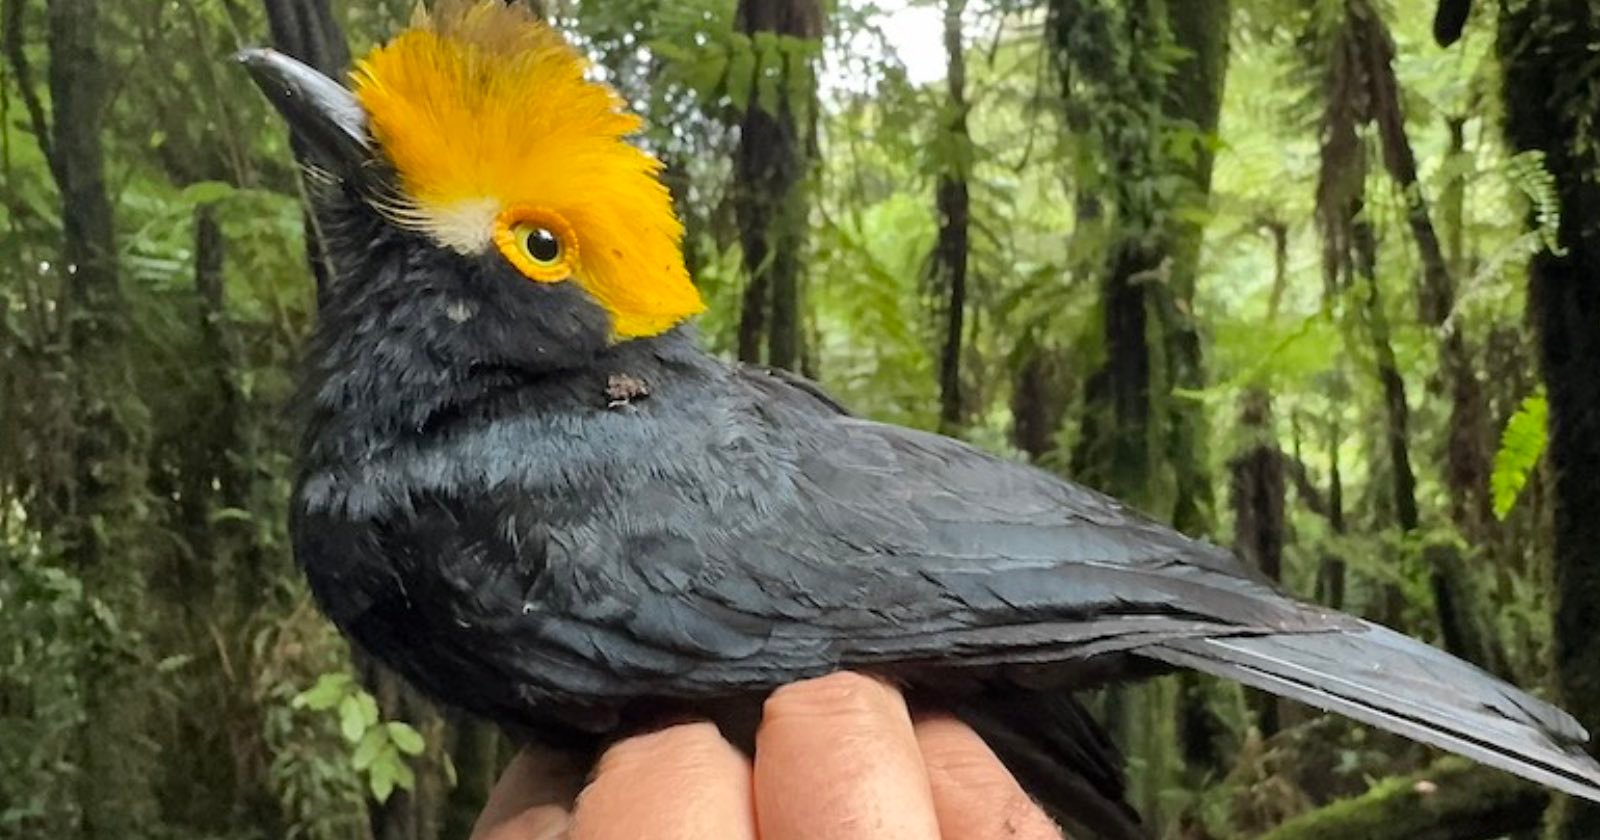 Stunning Lost Bird Species is Photographed For First Time Ever